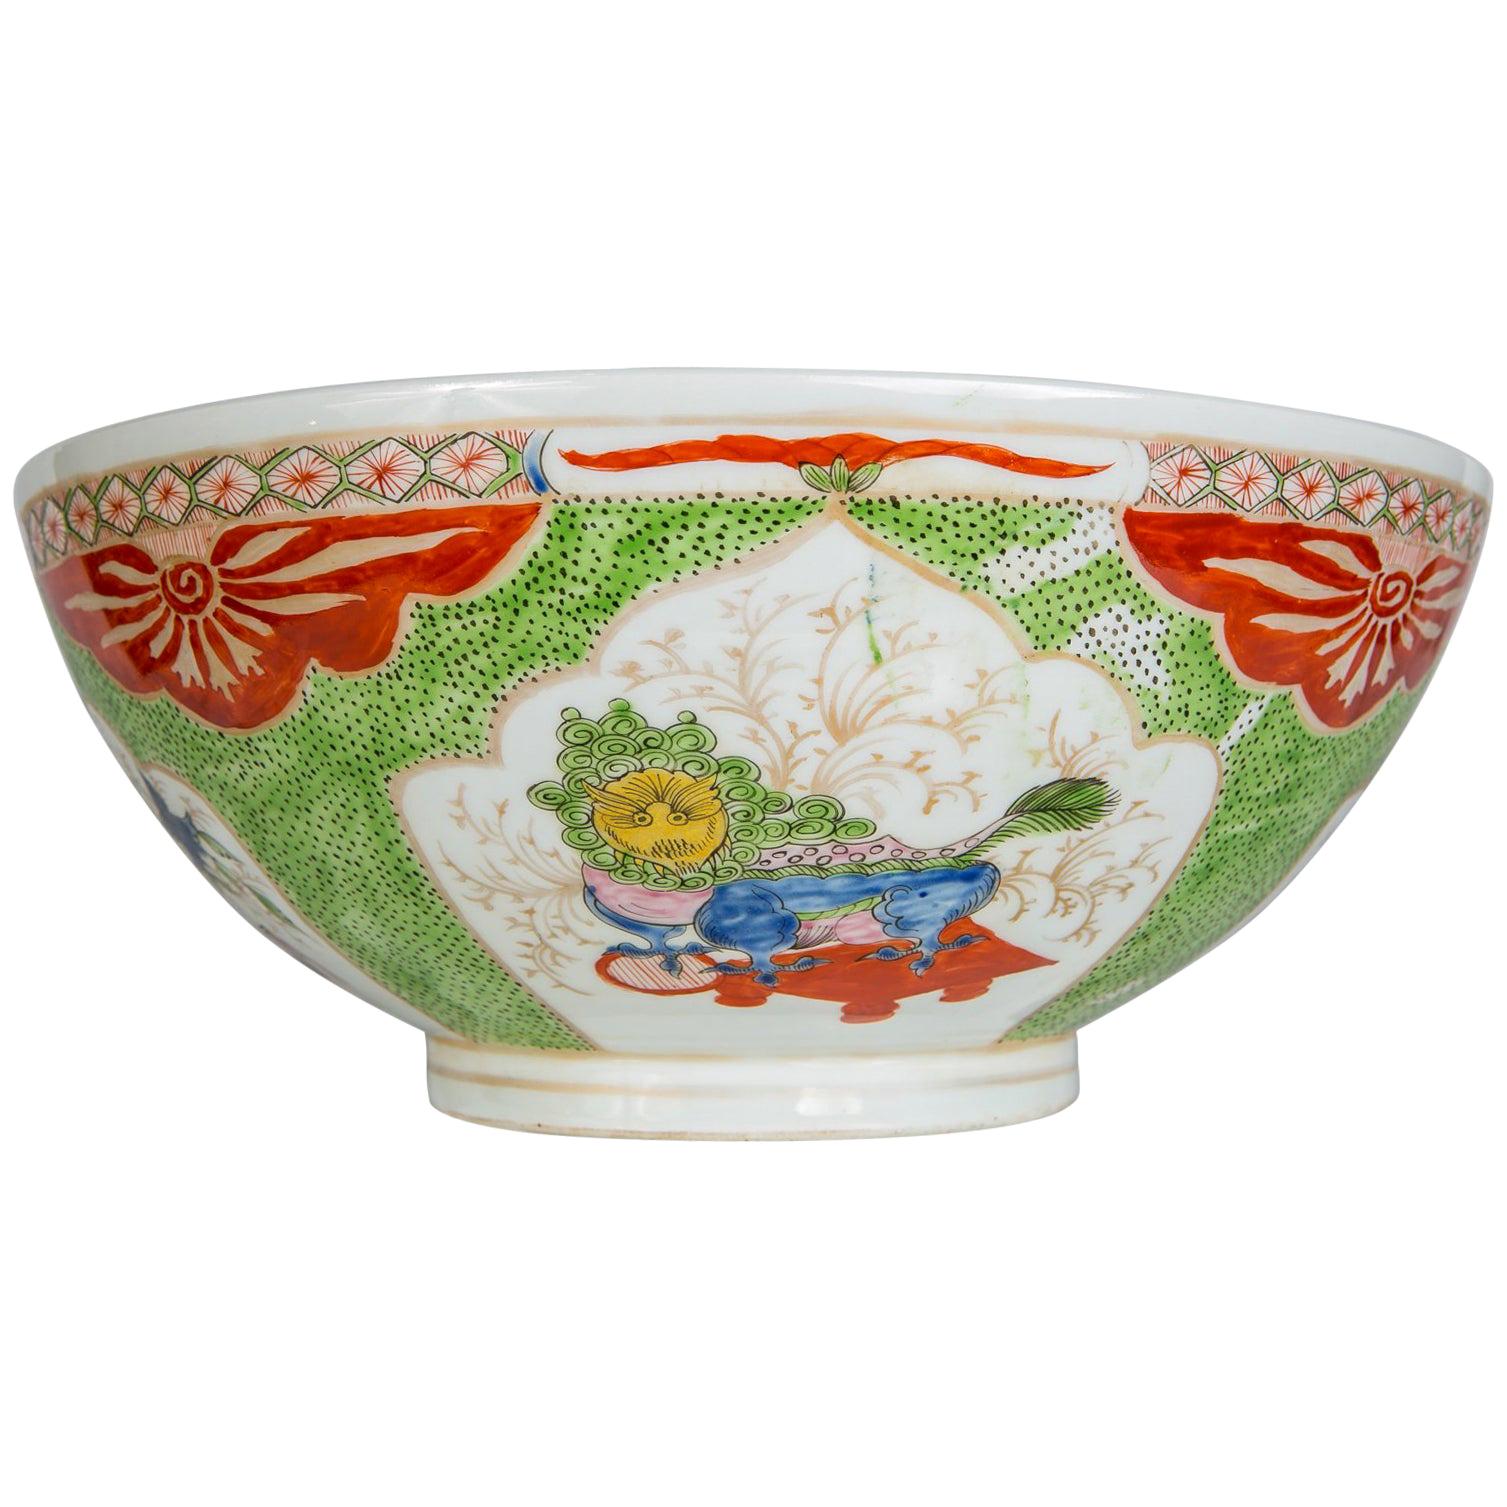 Dragons in Compartments Porcelain Punch Bowl Made, circa 1880